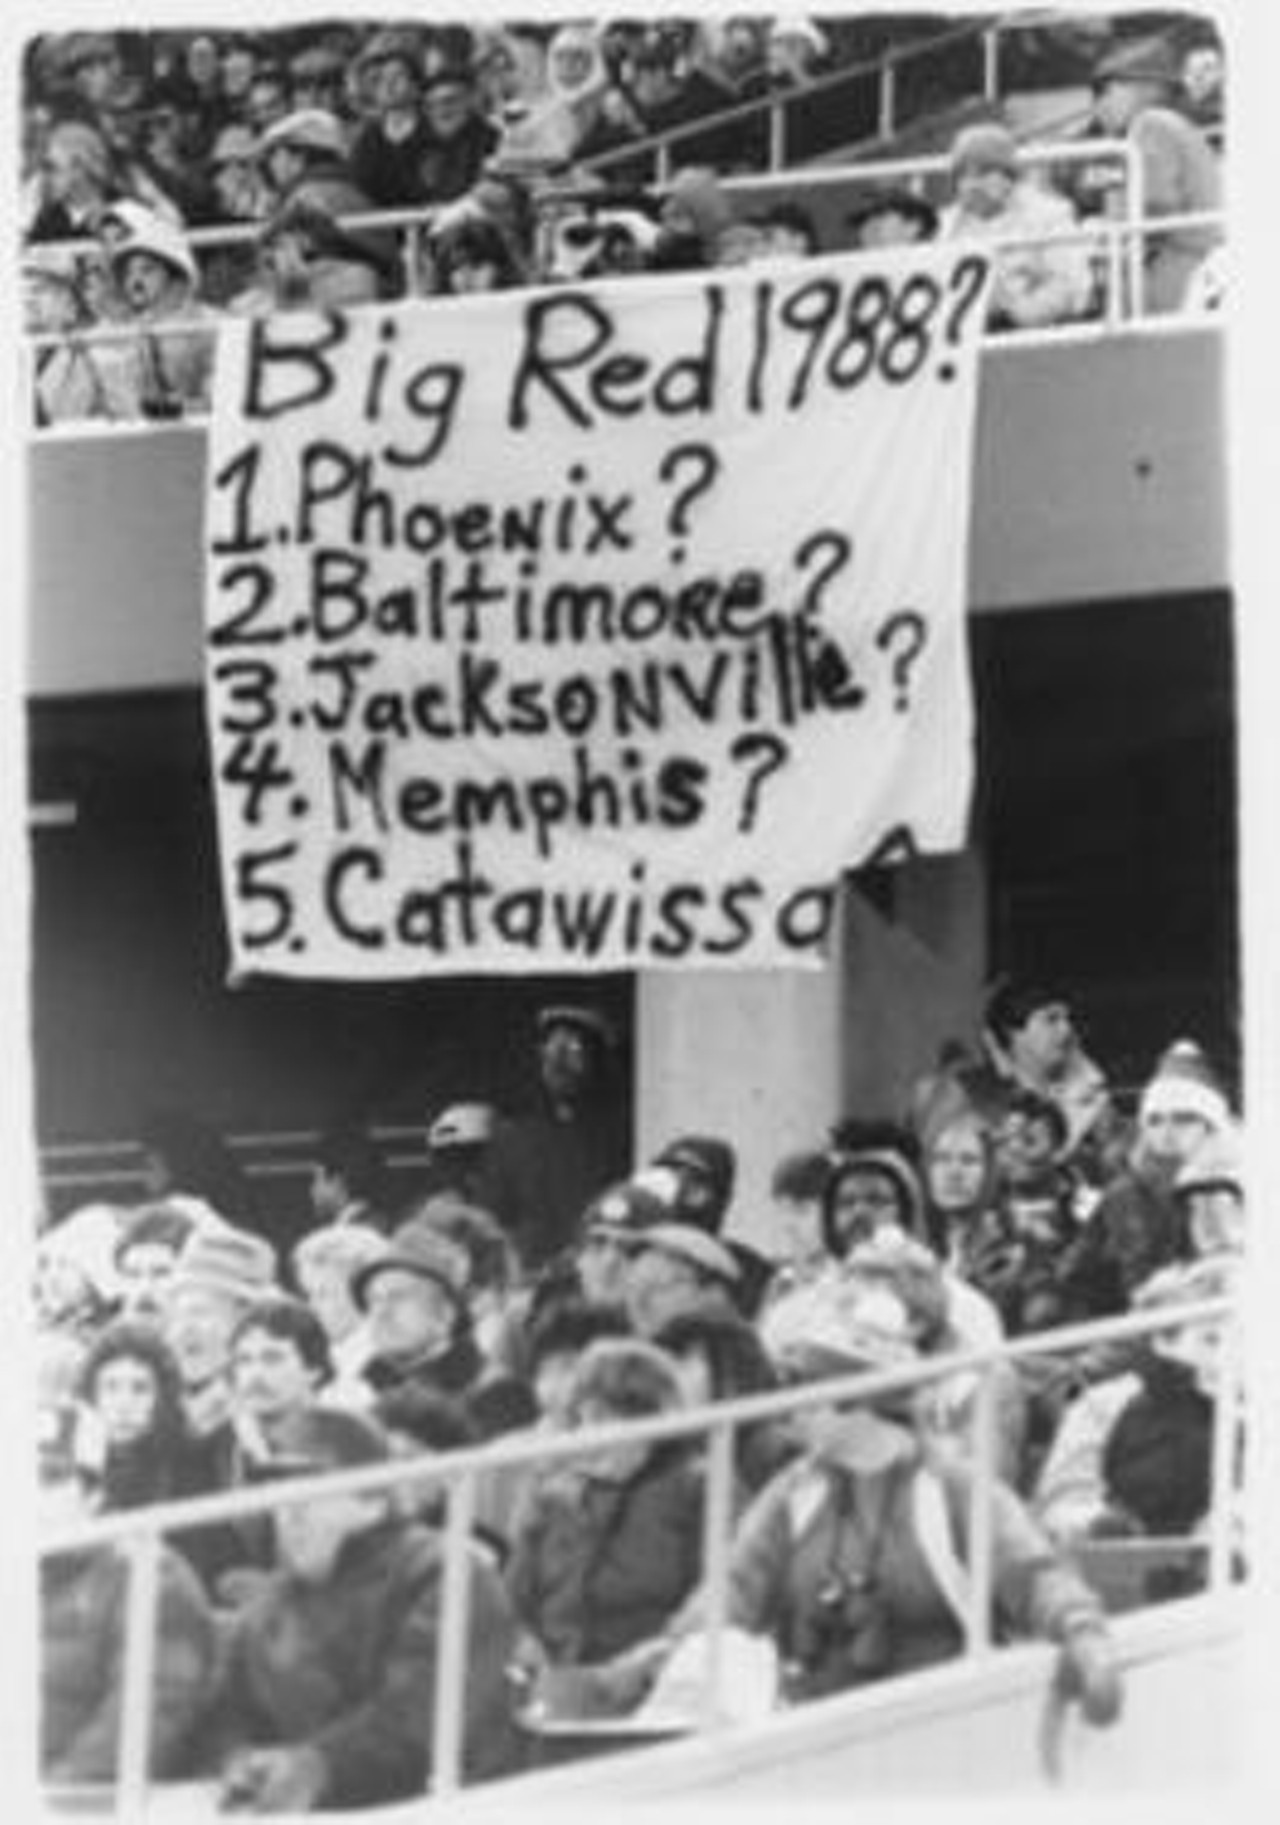 Even if the former St. Louis Cardinals were in the Super Bowl as the Arizona Cardinals, we still were pulling for them. Here's slide show of the Cardinals' not-so-glorious days in St. Louis.